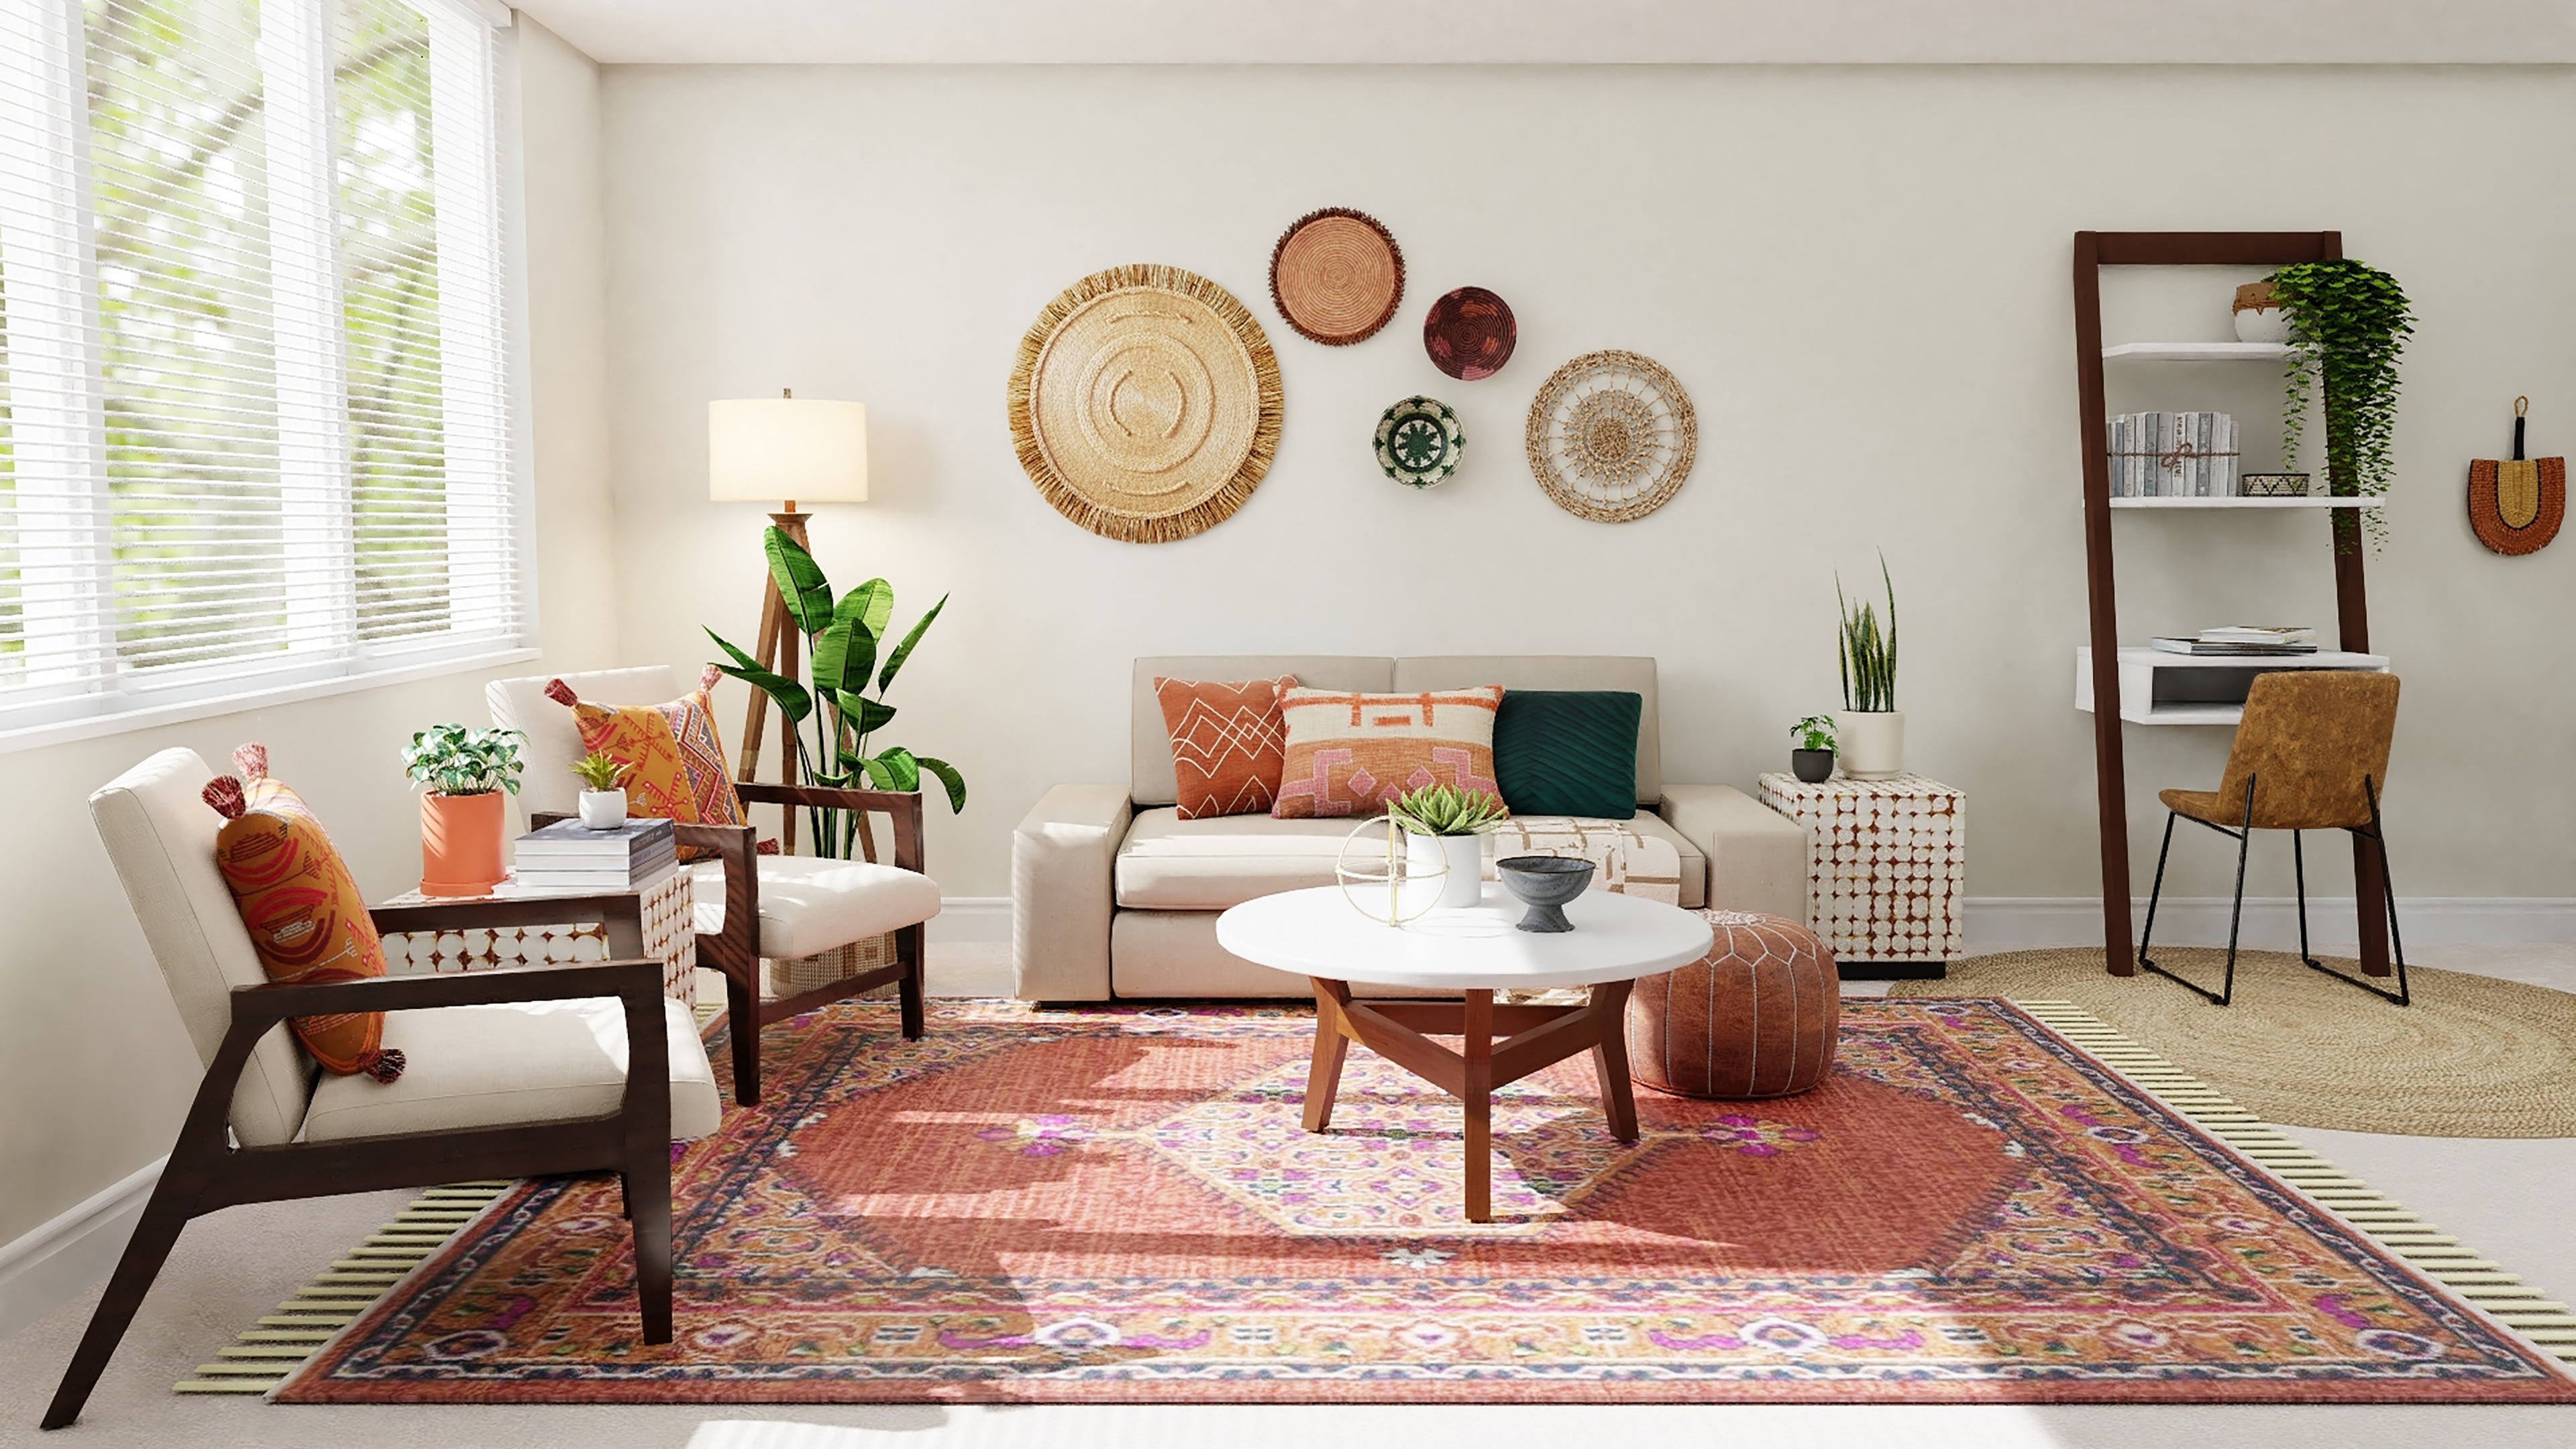 Modern living room with pink medallion rug, ivory loveseat, wood frame chairs, white-topped coffee table, house plants, hemp medallions, and small desk.